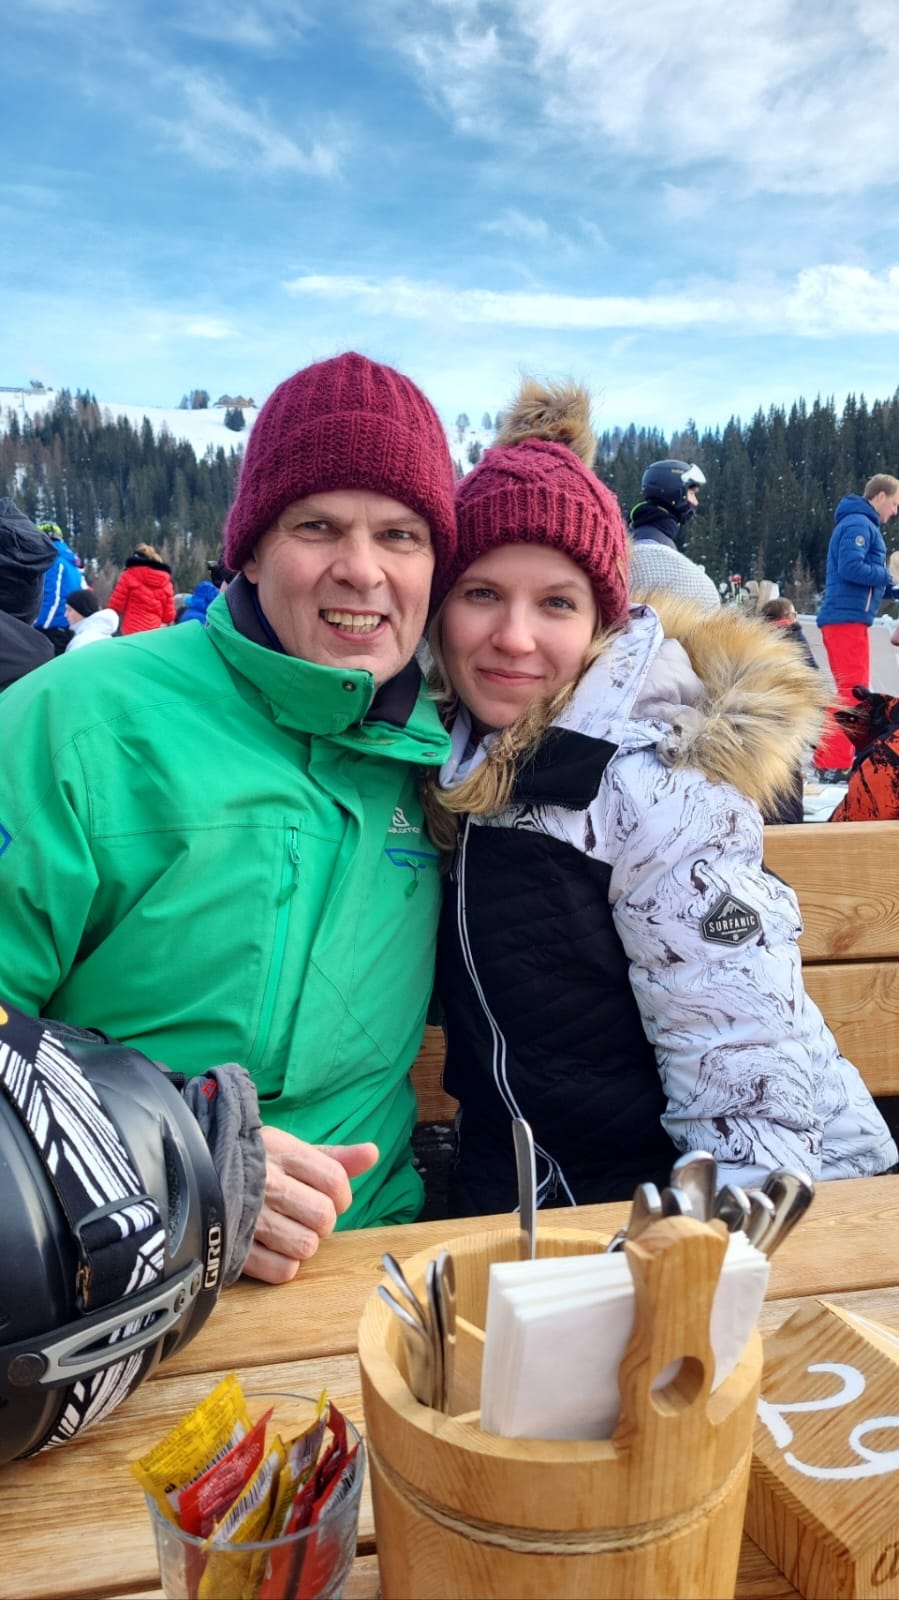 Picture of Hannah and her Dad, Grant, skiing together